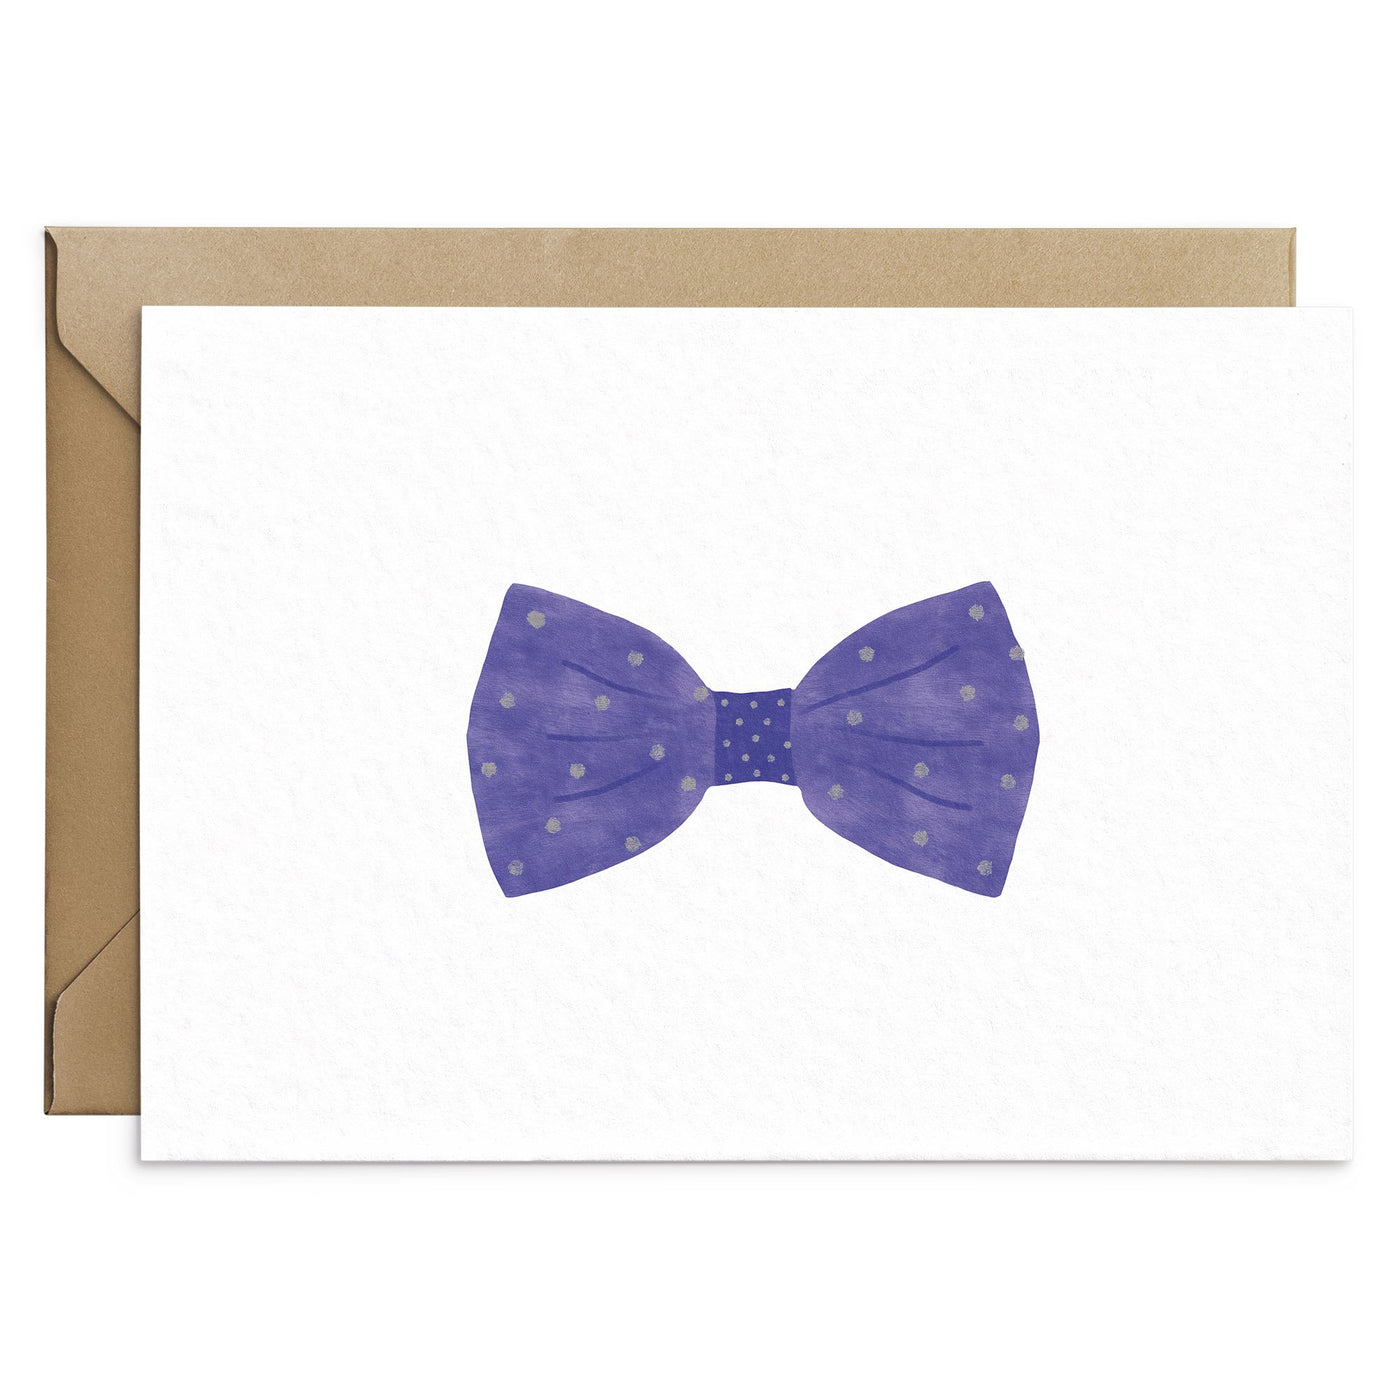 Blue Bow Tie Card - Poppins & Co.